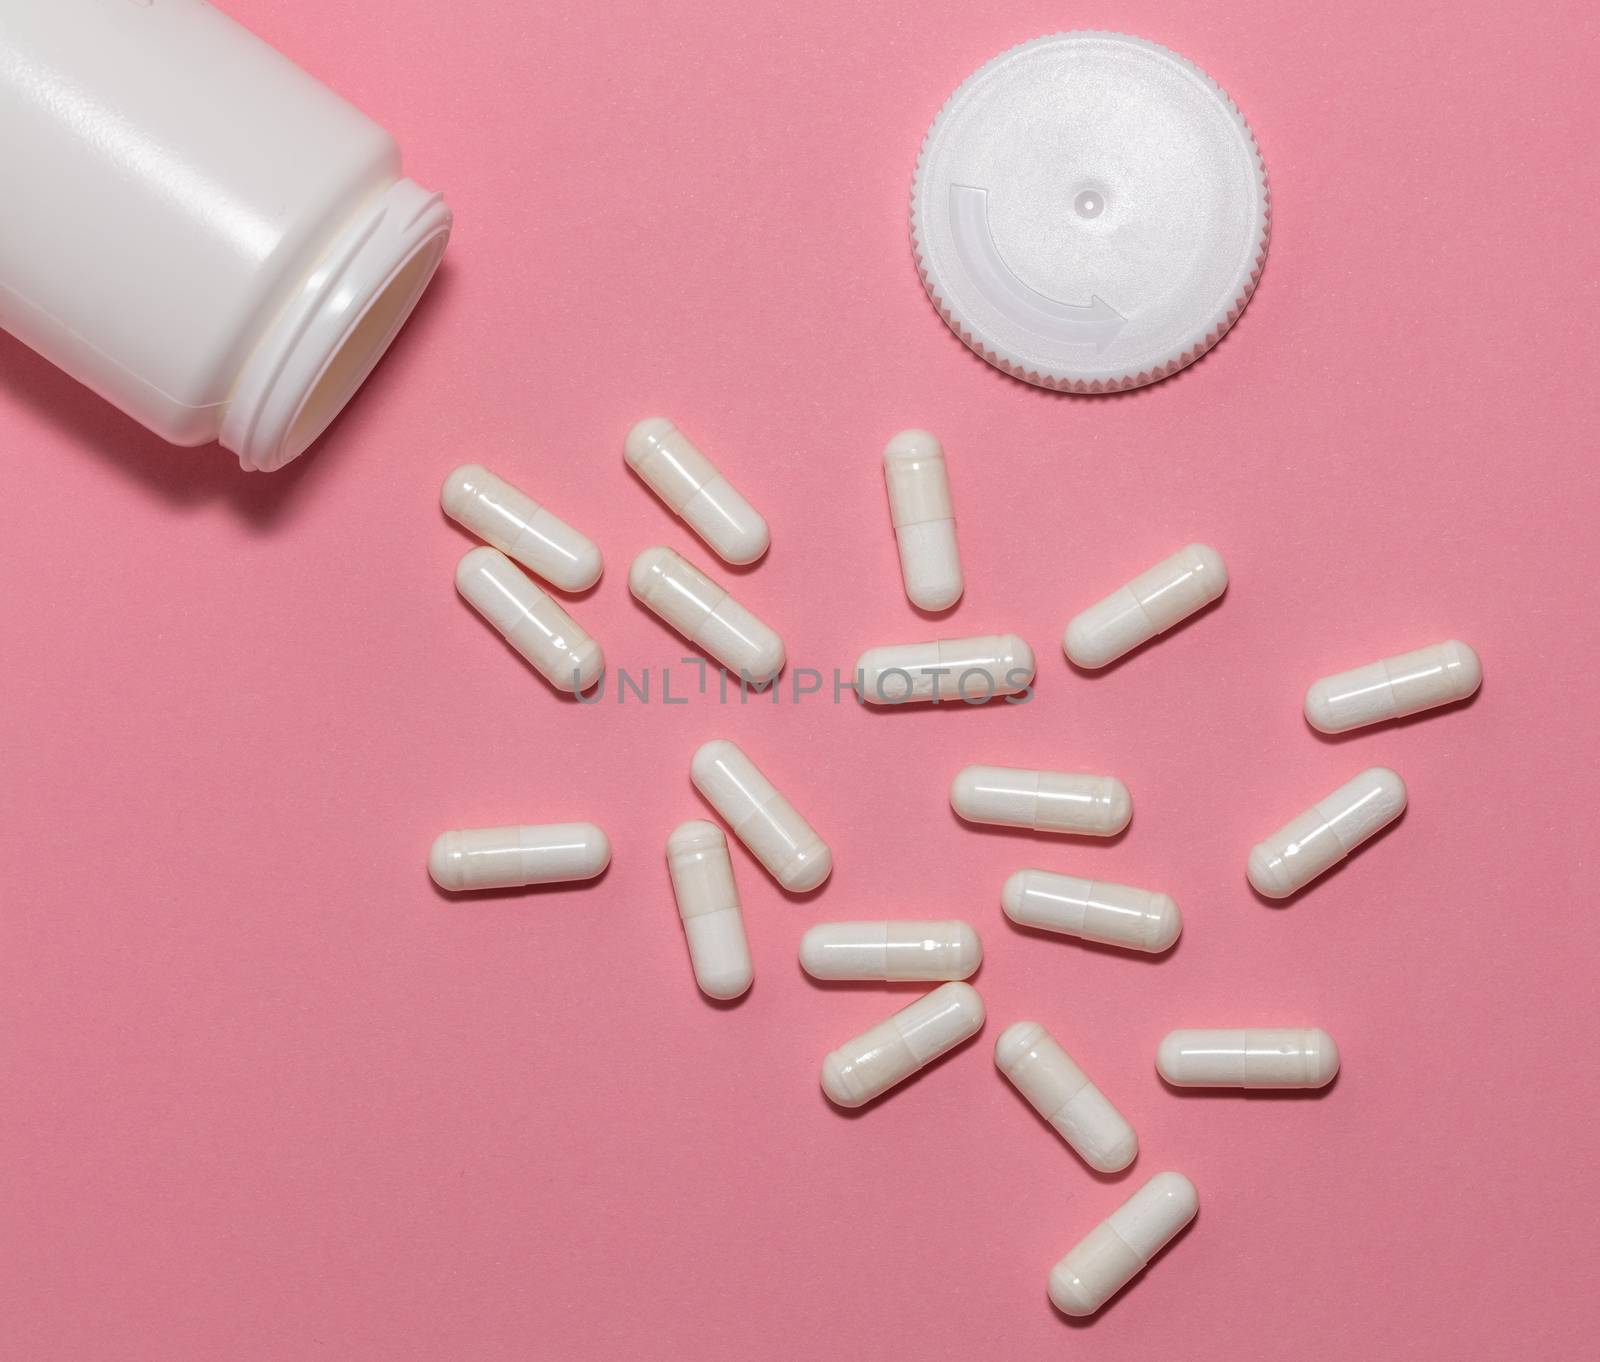 Top view of scattered prescription white pills, container, cap on pink background. White container and white pills scattered on pastel pink background. Healthcare, medical and pharmaceutical concept. by DamantisZ